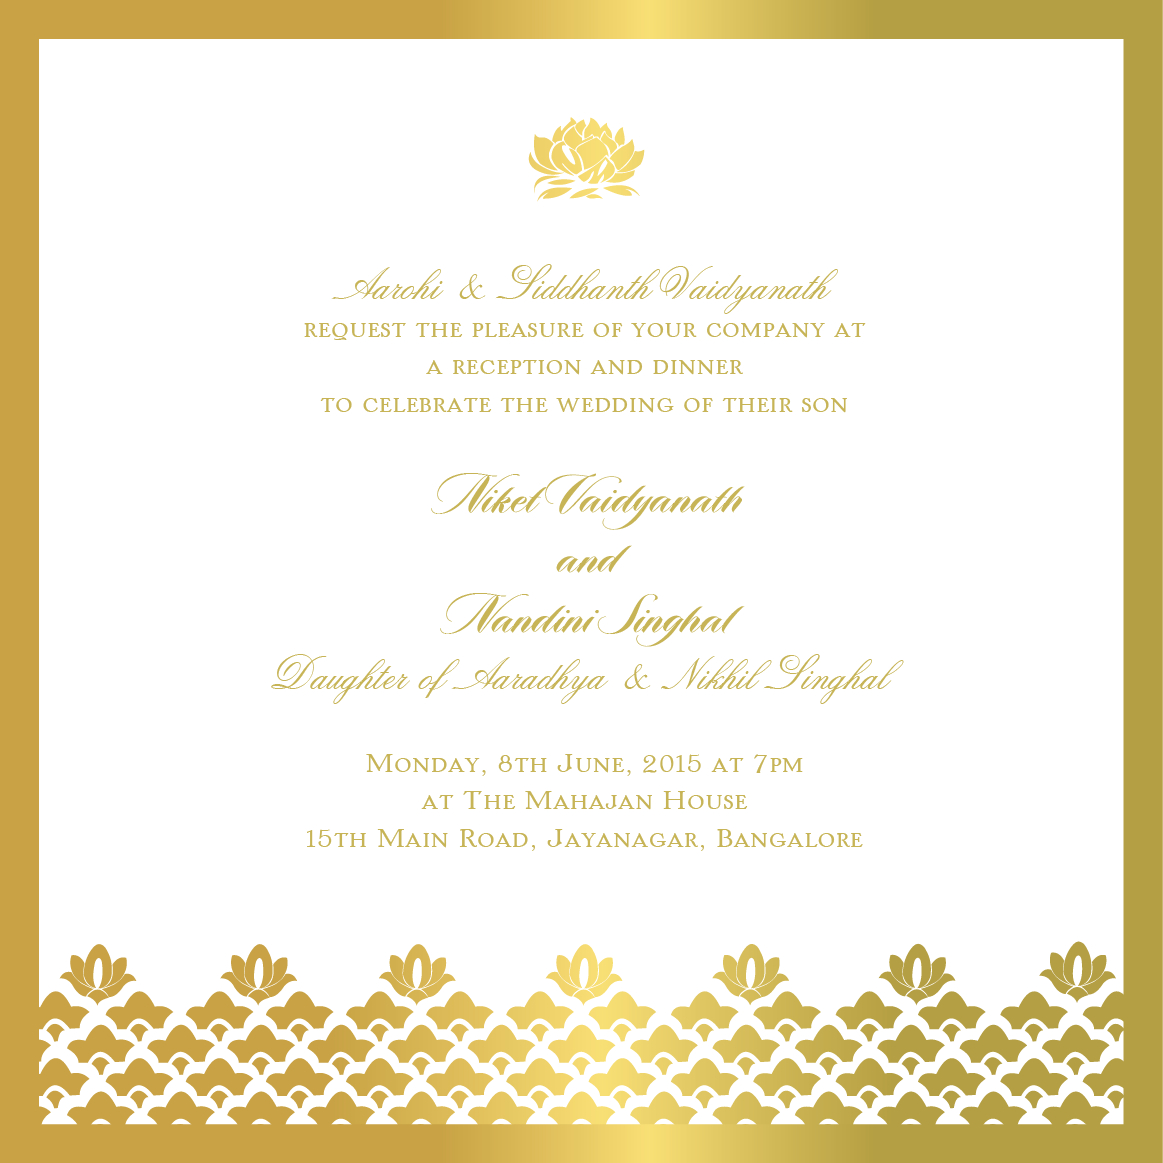 Elegant Gold Border And Motifs On Indian Reception Invitation Cards intended for sizing 1163 X 1163